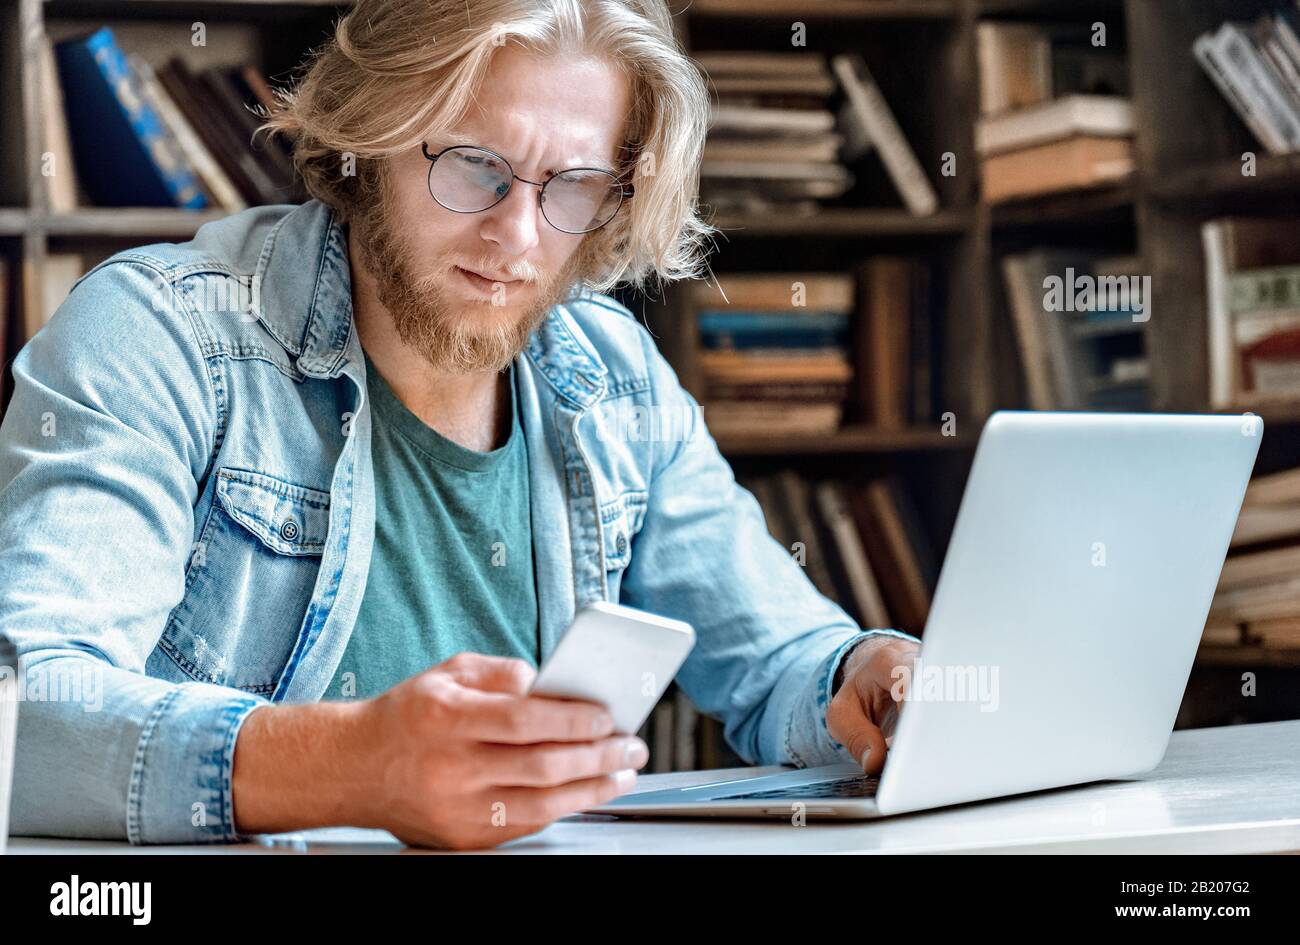 Confused concentrated man worried look at modern smartphone screen copy space. Stock Photo